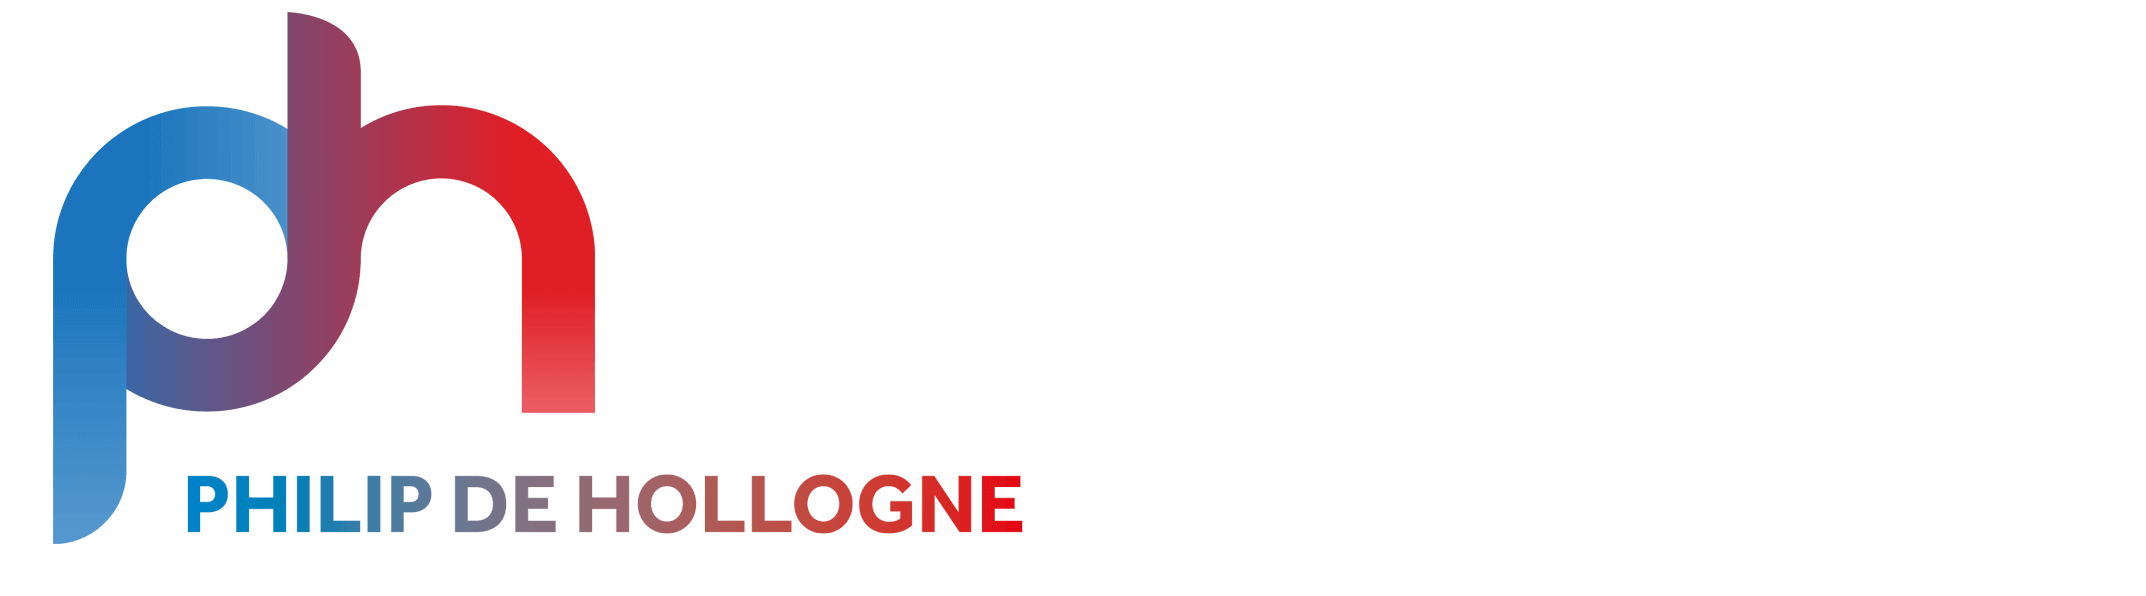 PDH Consulting